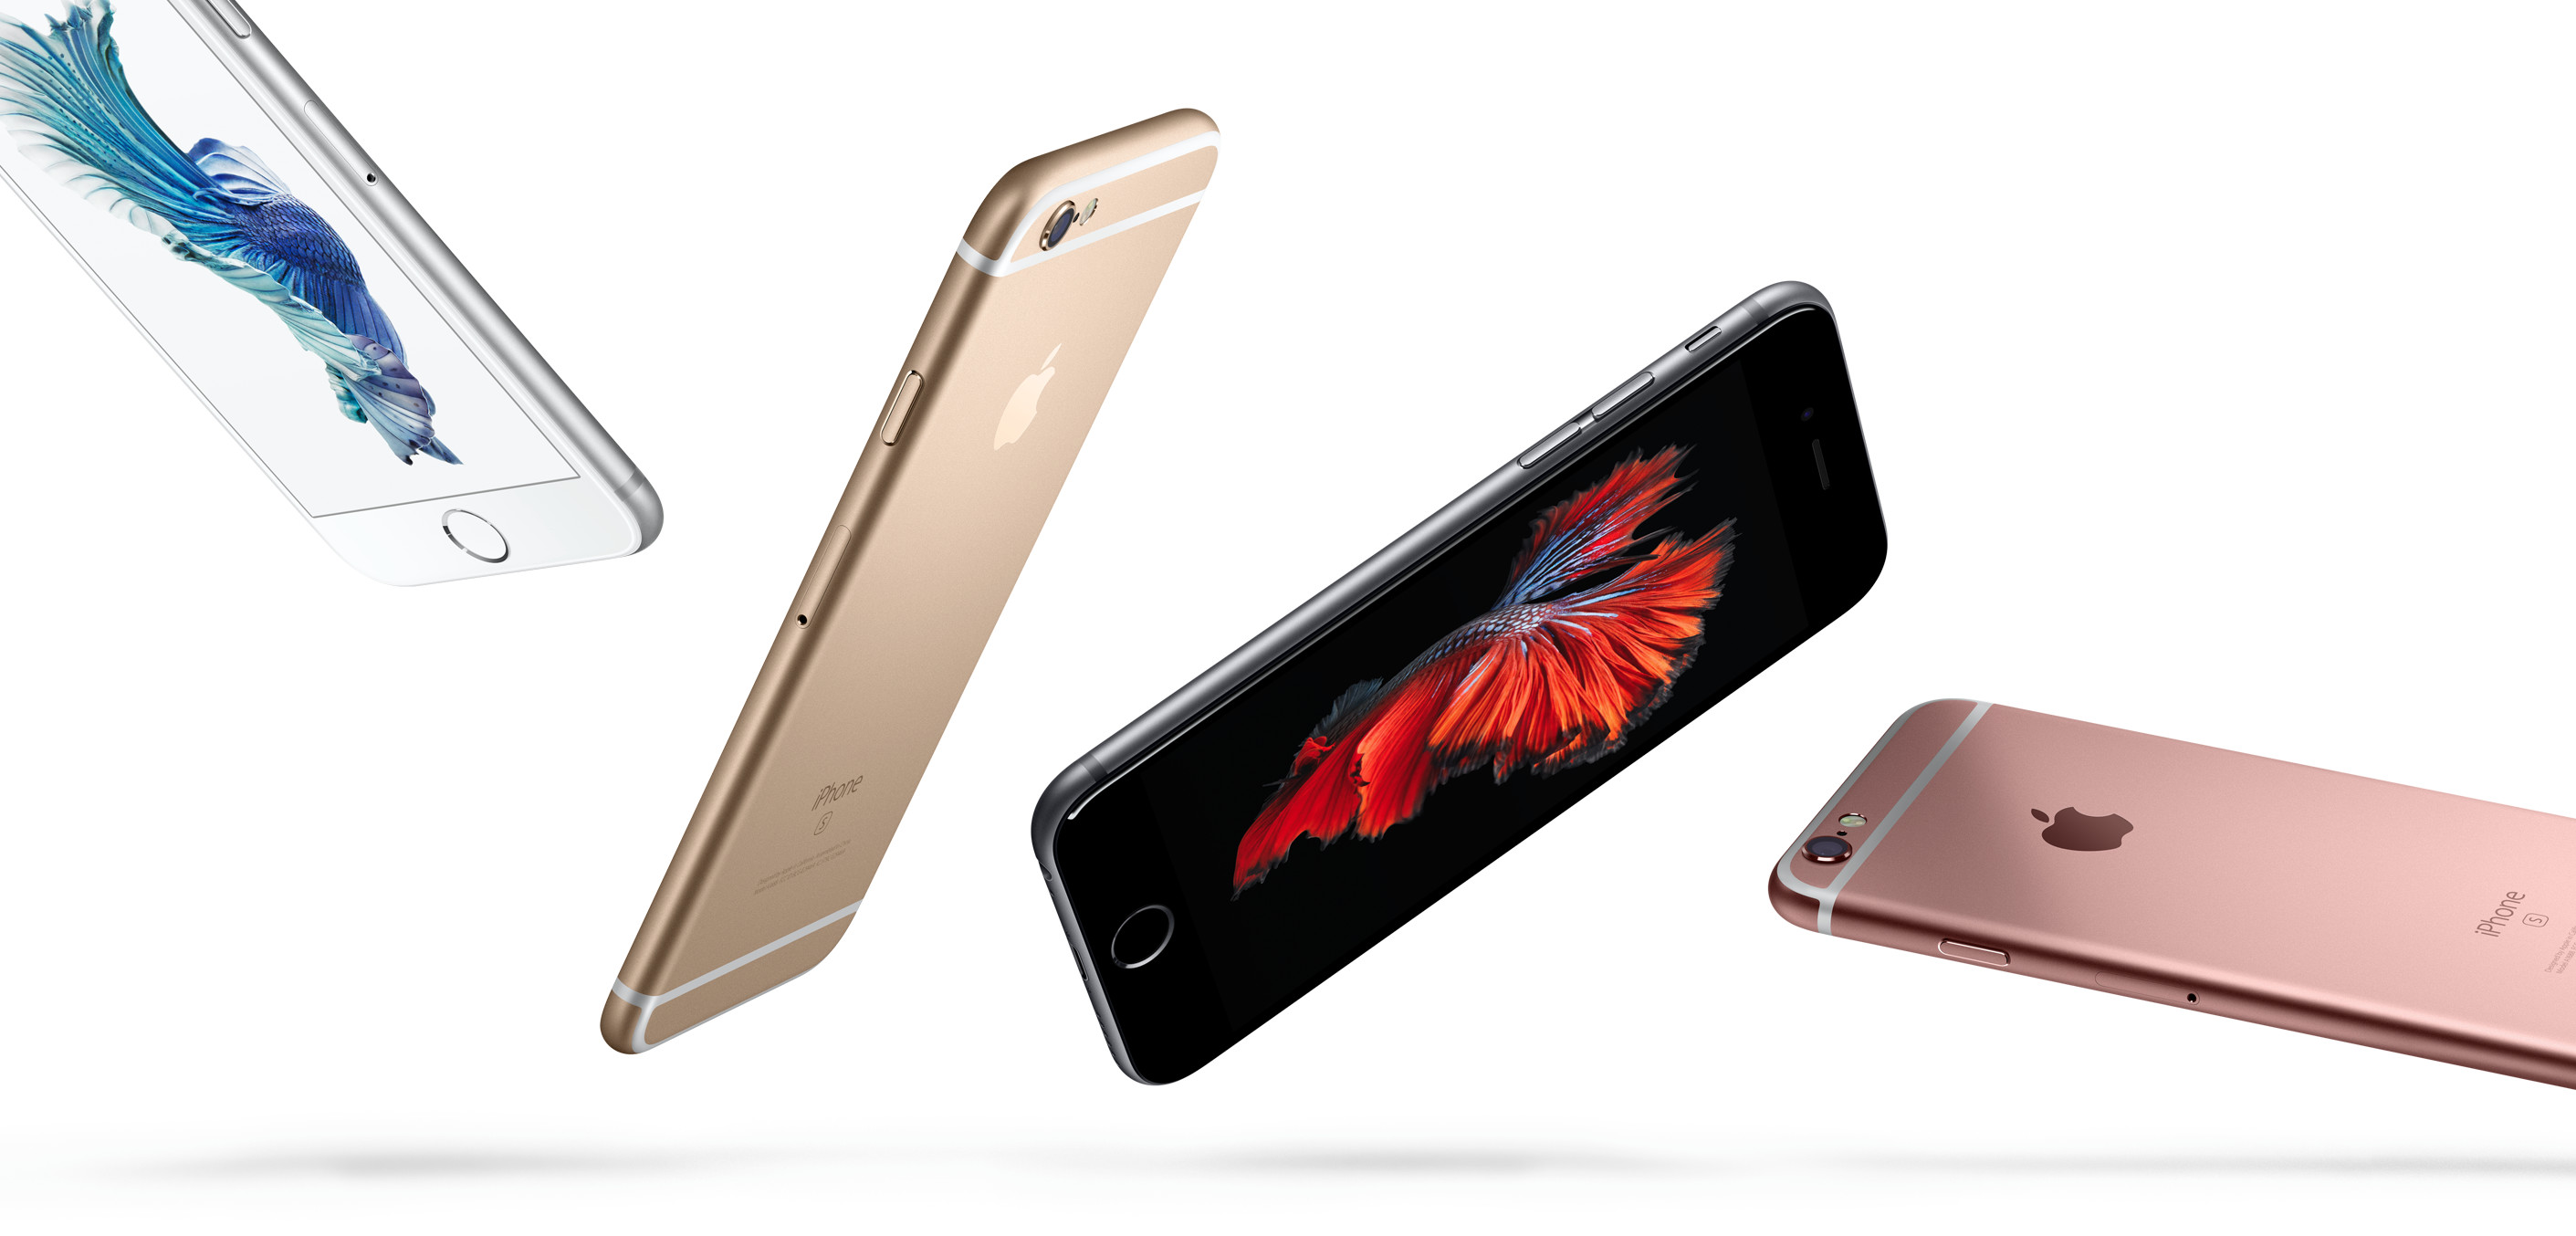 2822x1354 Apple introduces the iPhone 6s and 6s Plus in rose gold, with 3D Touch and  animated wallpaper